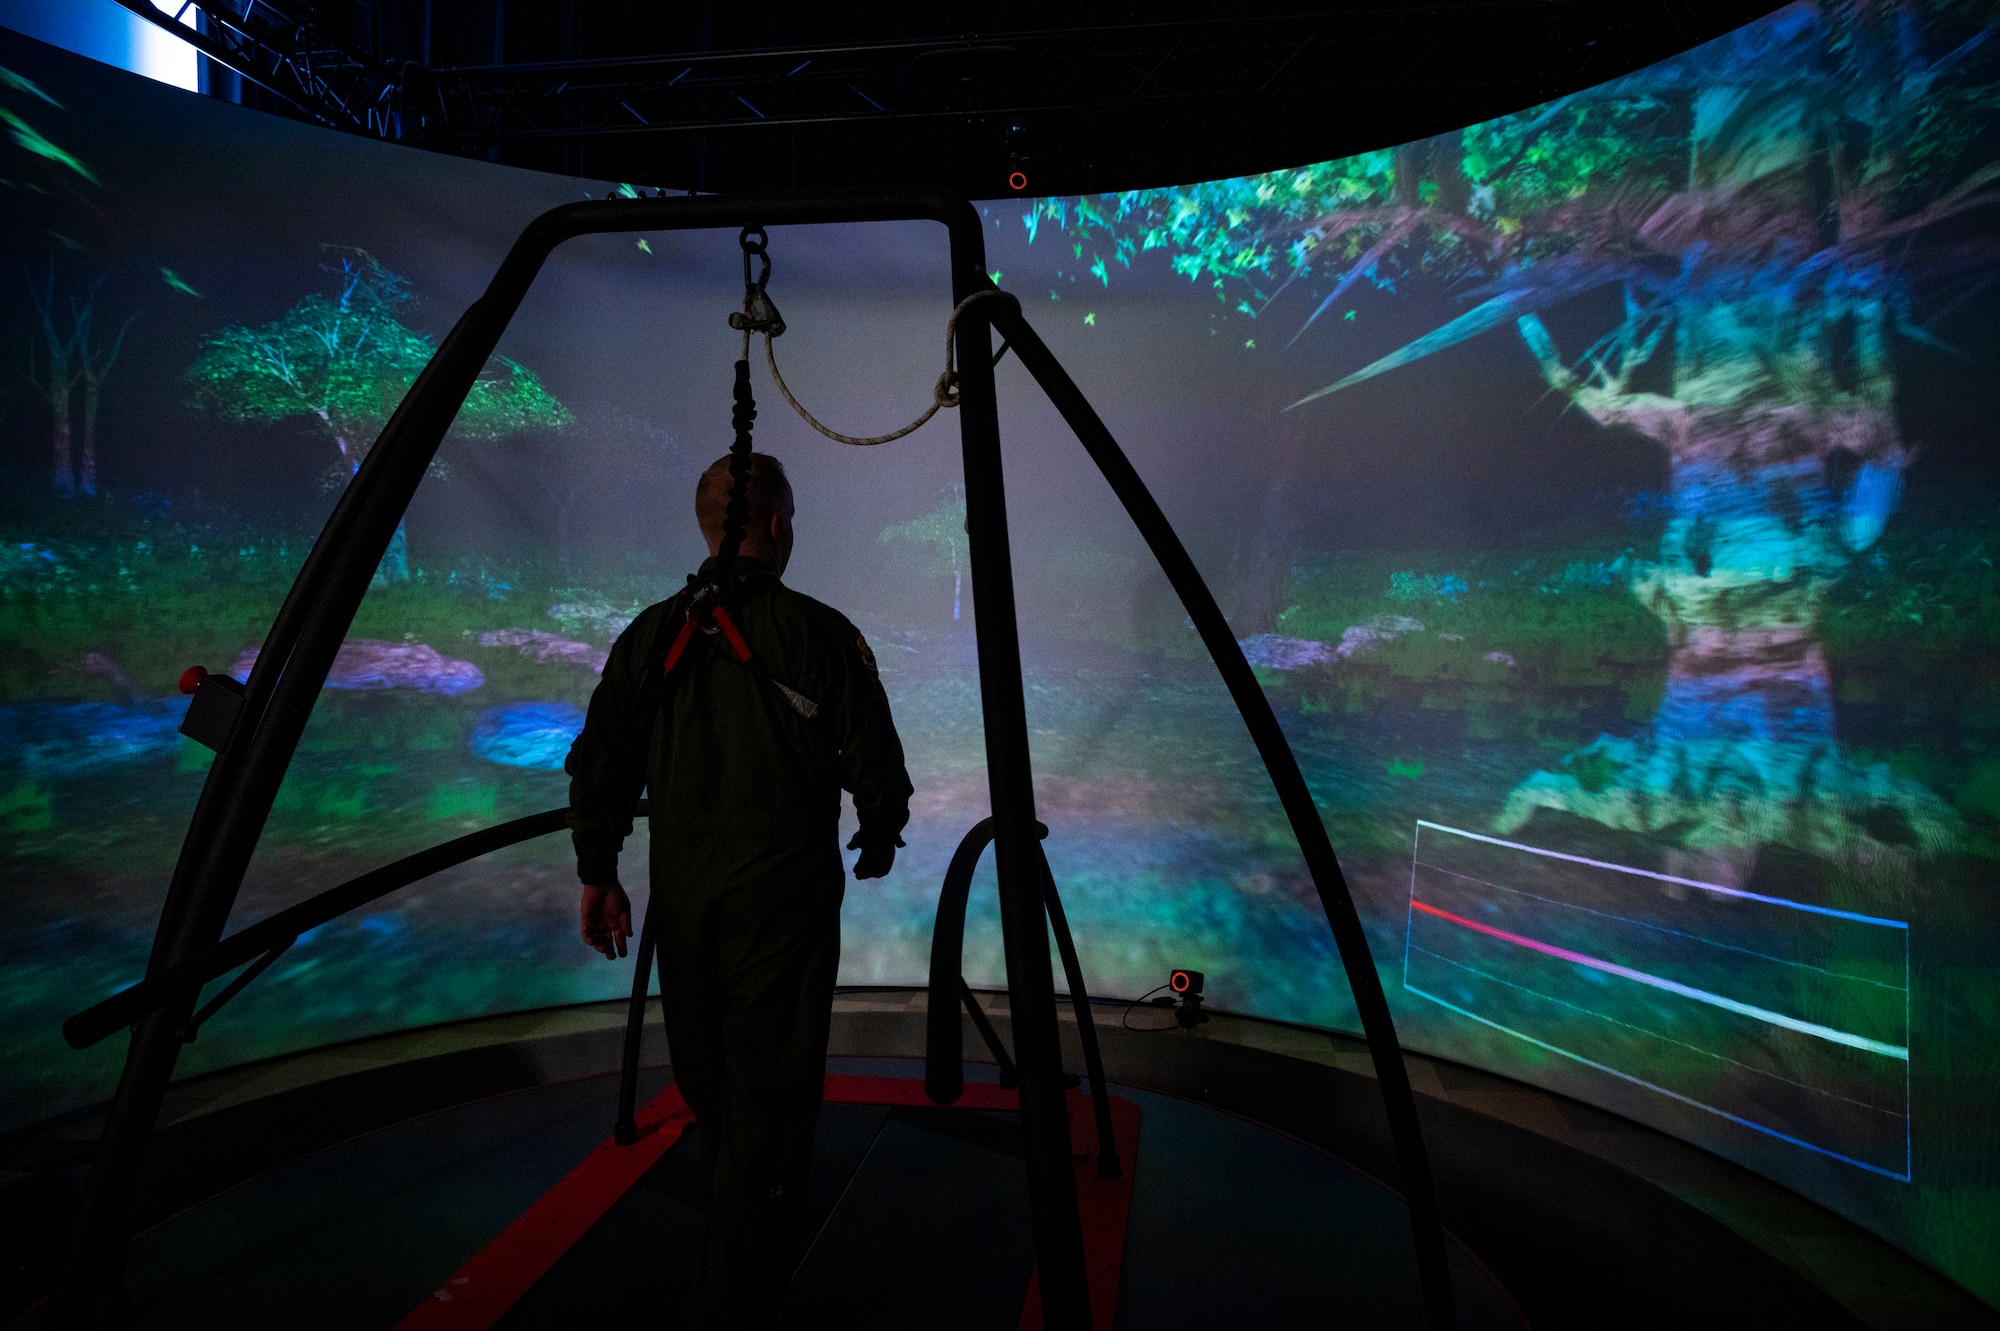 U.S. Air Force Col. Adam Bingham, the 6th Air Refueling Wing commander, walks on a Virtual Reality motion platform at the University of South Florida Research Park, Tampa, FL, Sep. 16, 2022.